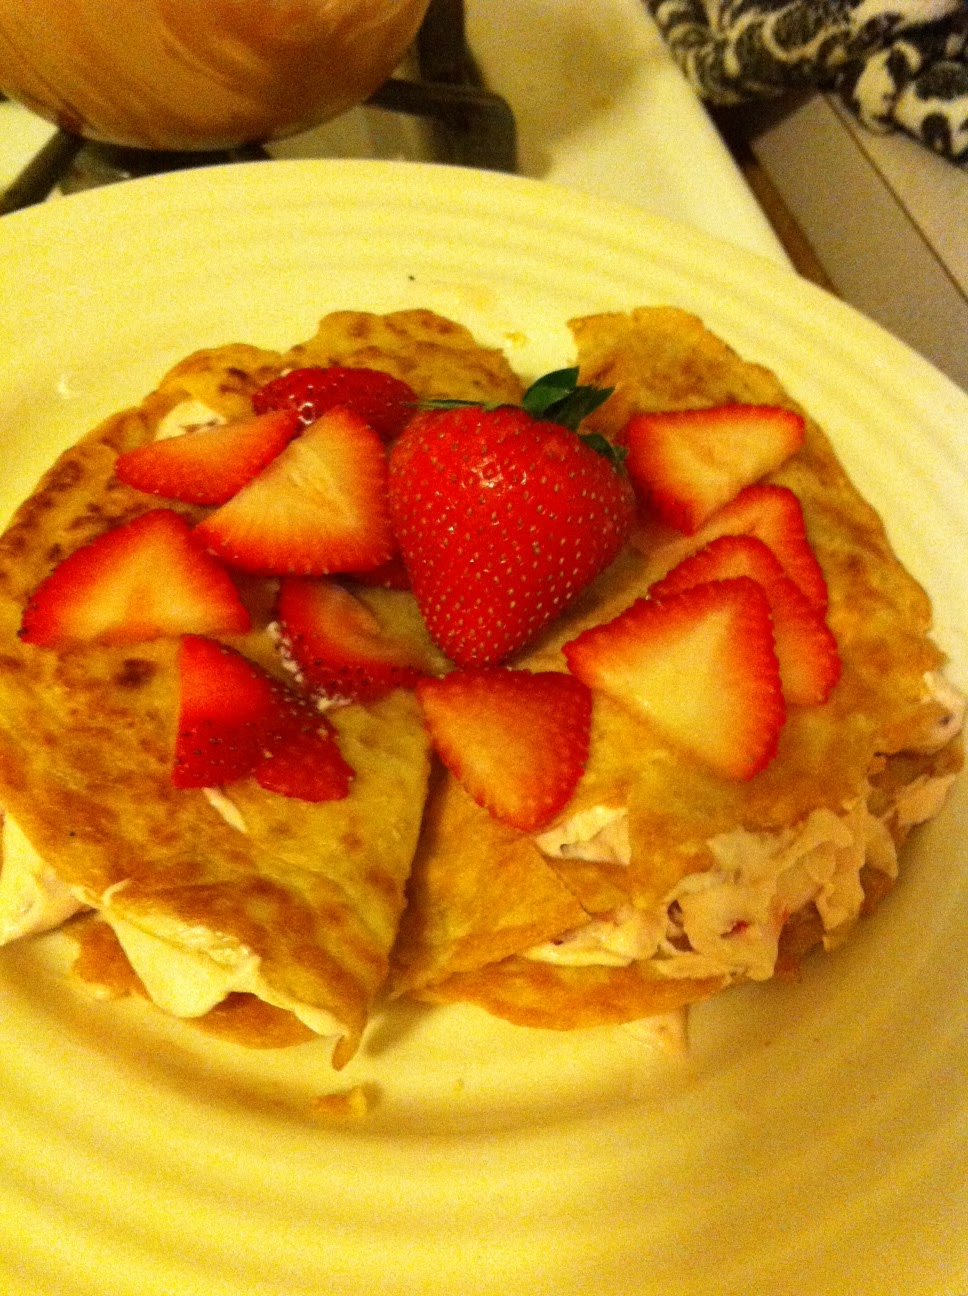 The Murderless Menu: Crepes with Strawberry/Raspberry Mascarpone Filling